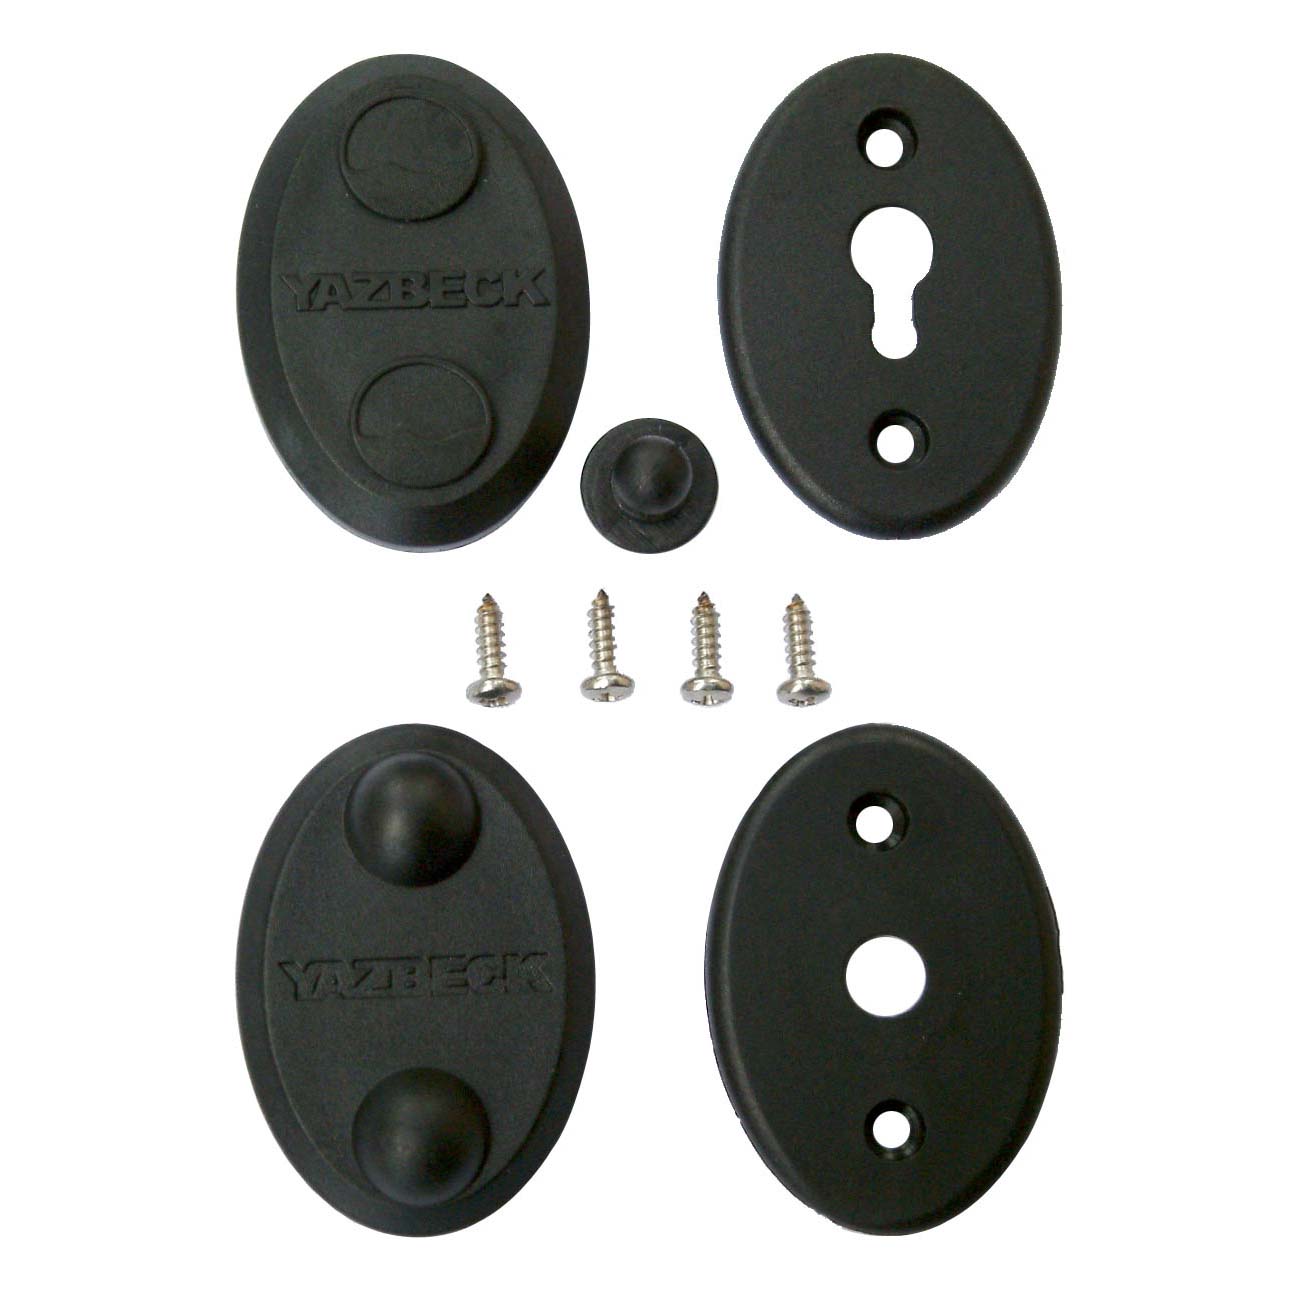 Yazbeck-Replacement-Clips-black